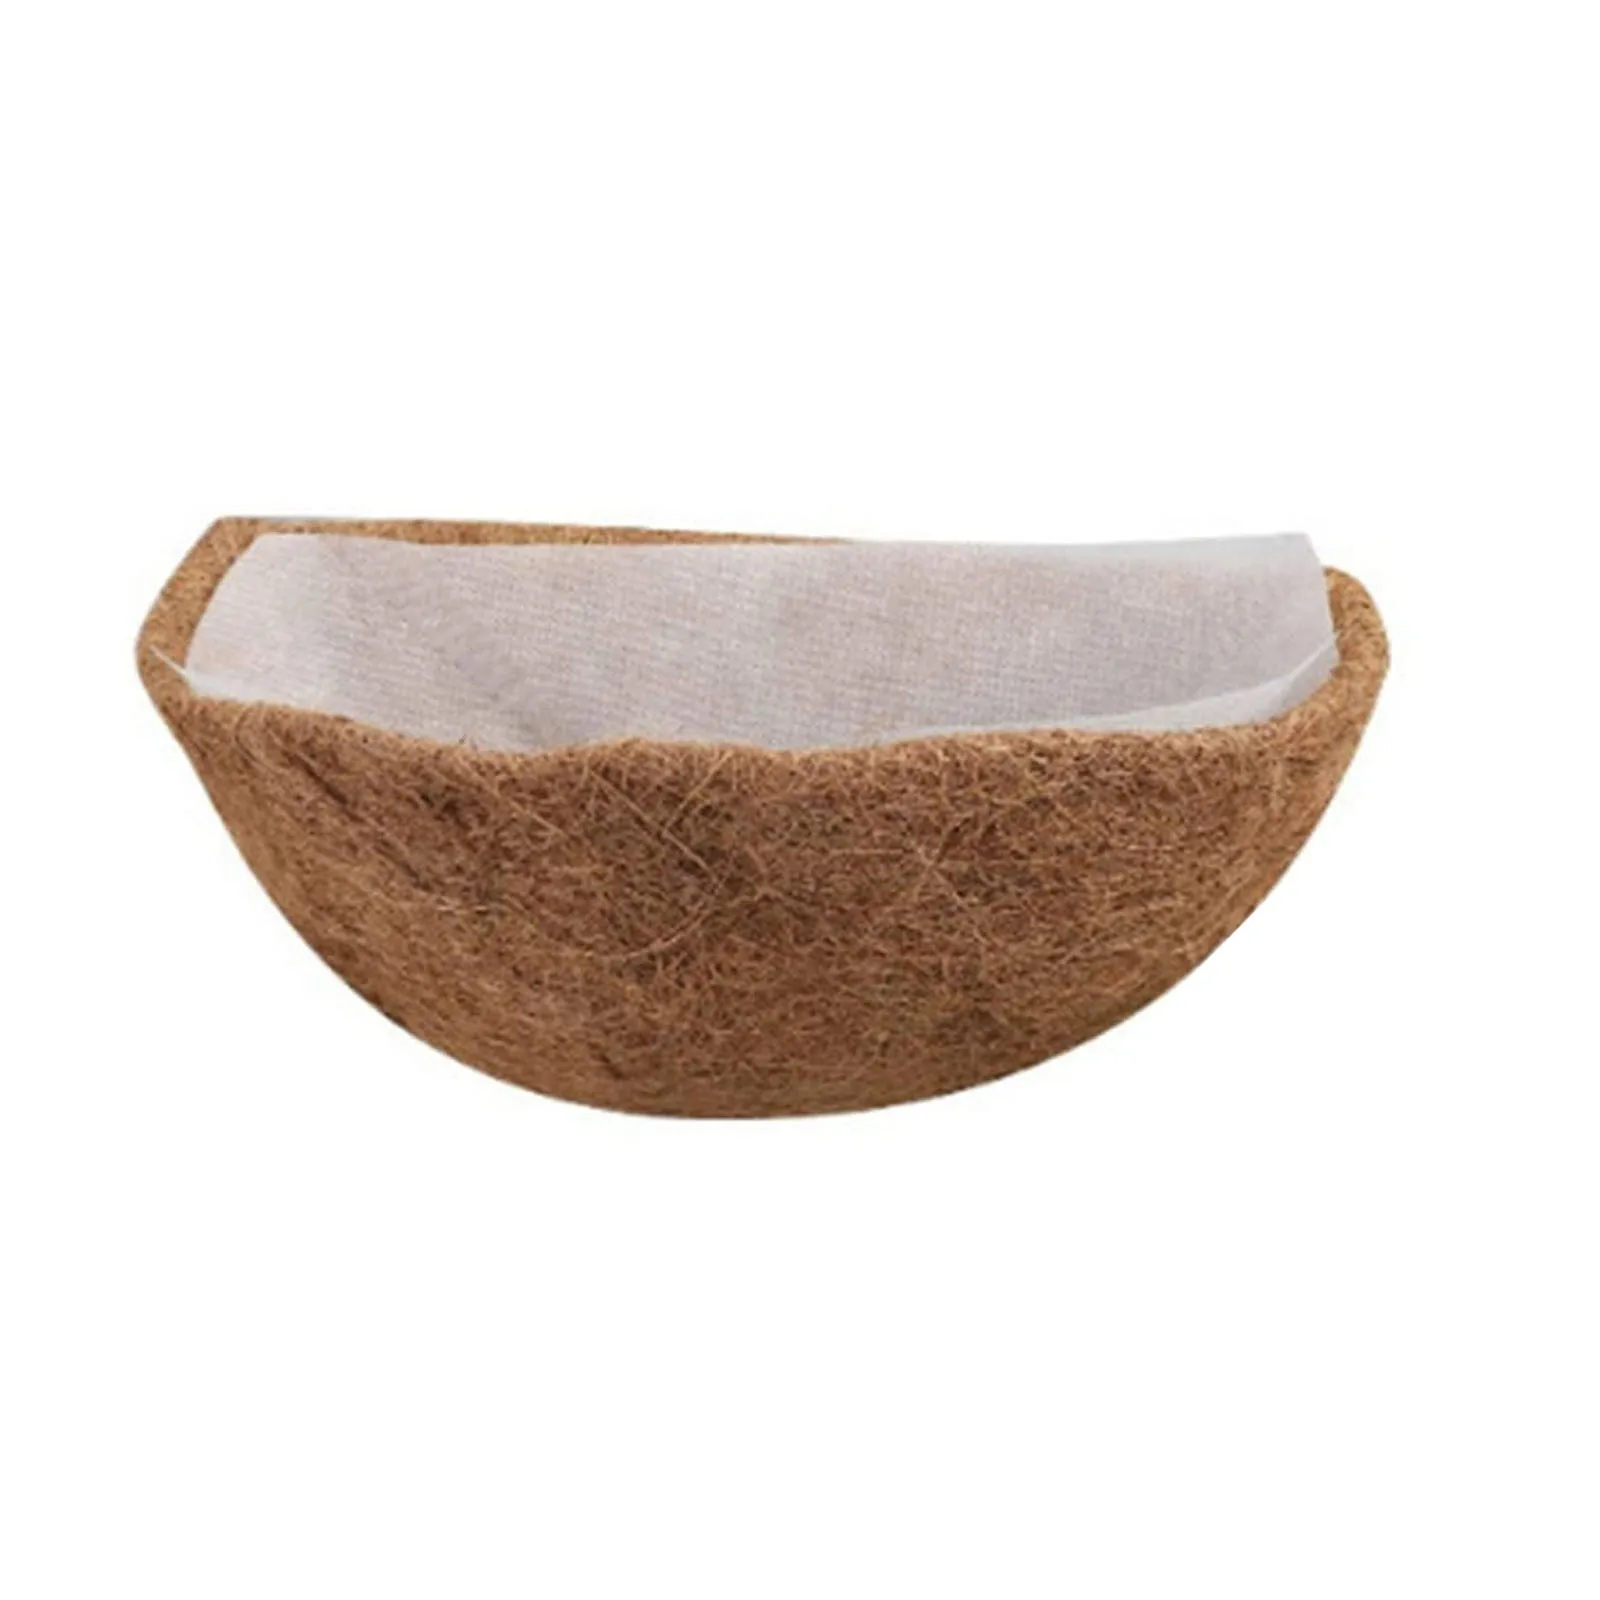 1Pc 18 Inch Round Coco Liners with 2pc Non-Woven Fabric Lining Replacement Coconut Coir Fiber Lining for Hanging Basket Nonwoven Cloth Lining for Reduce Leakage of Soil and Water 